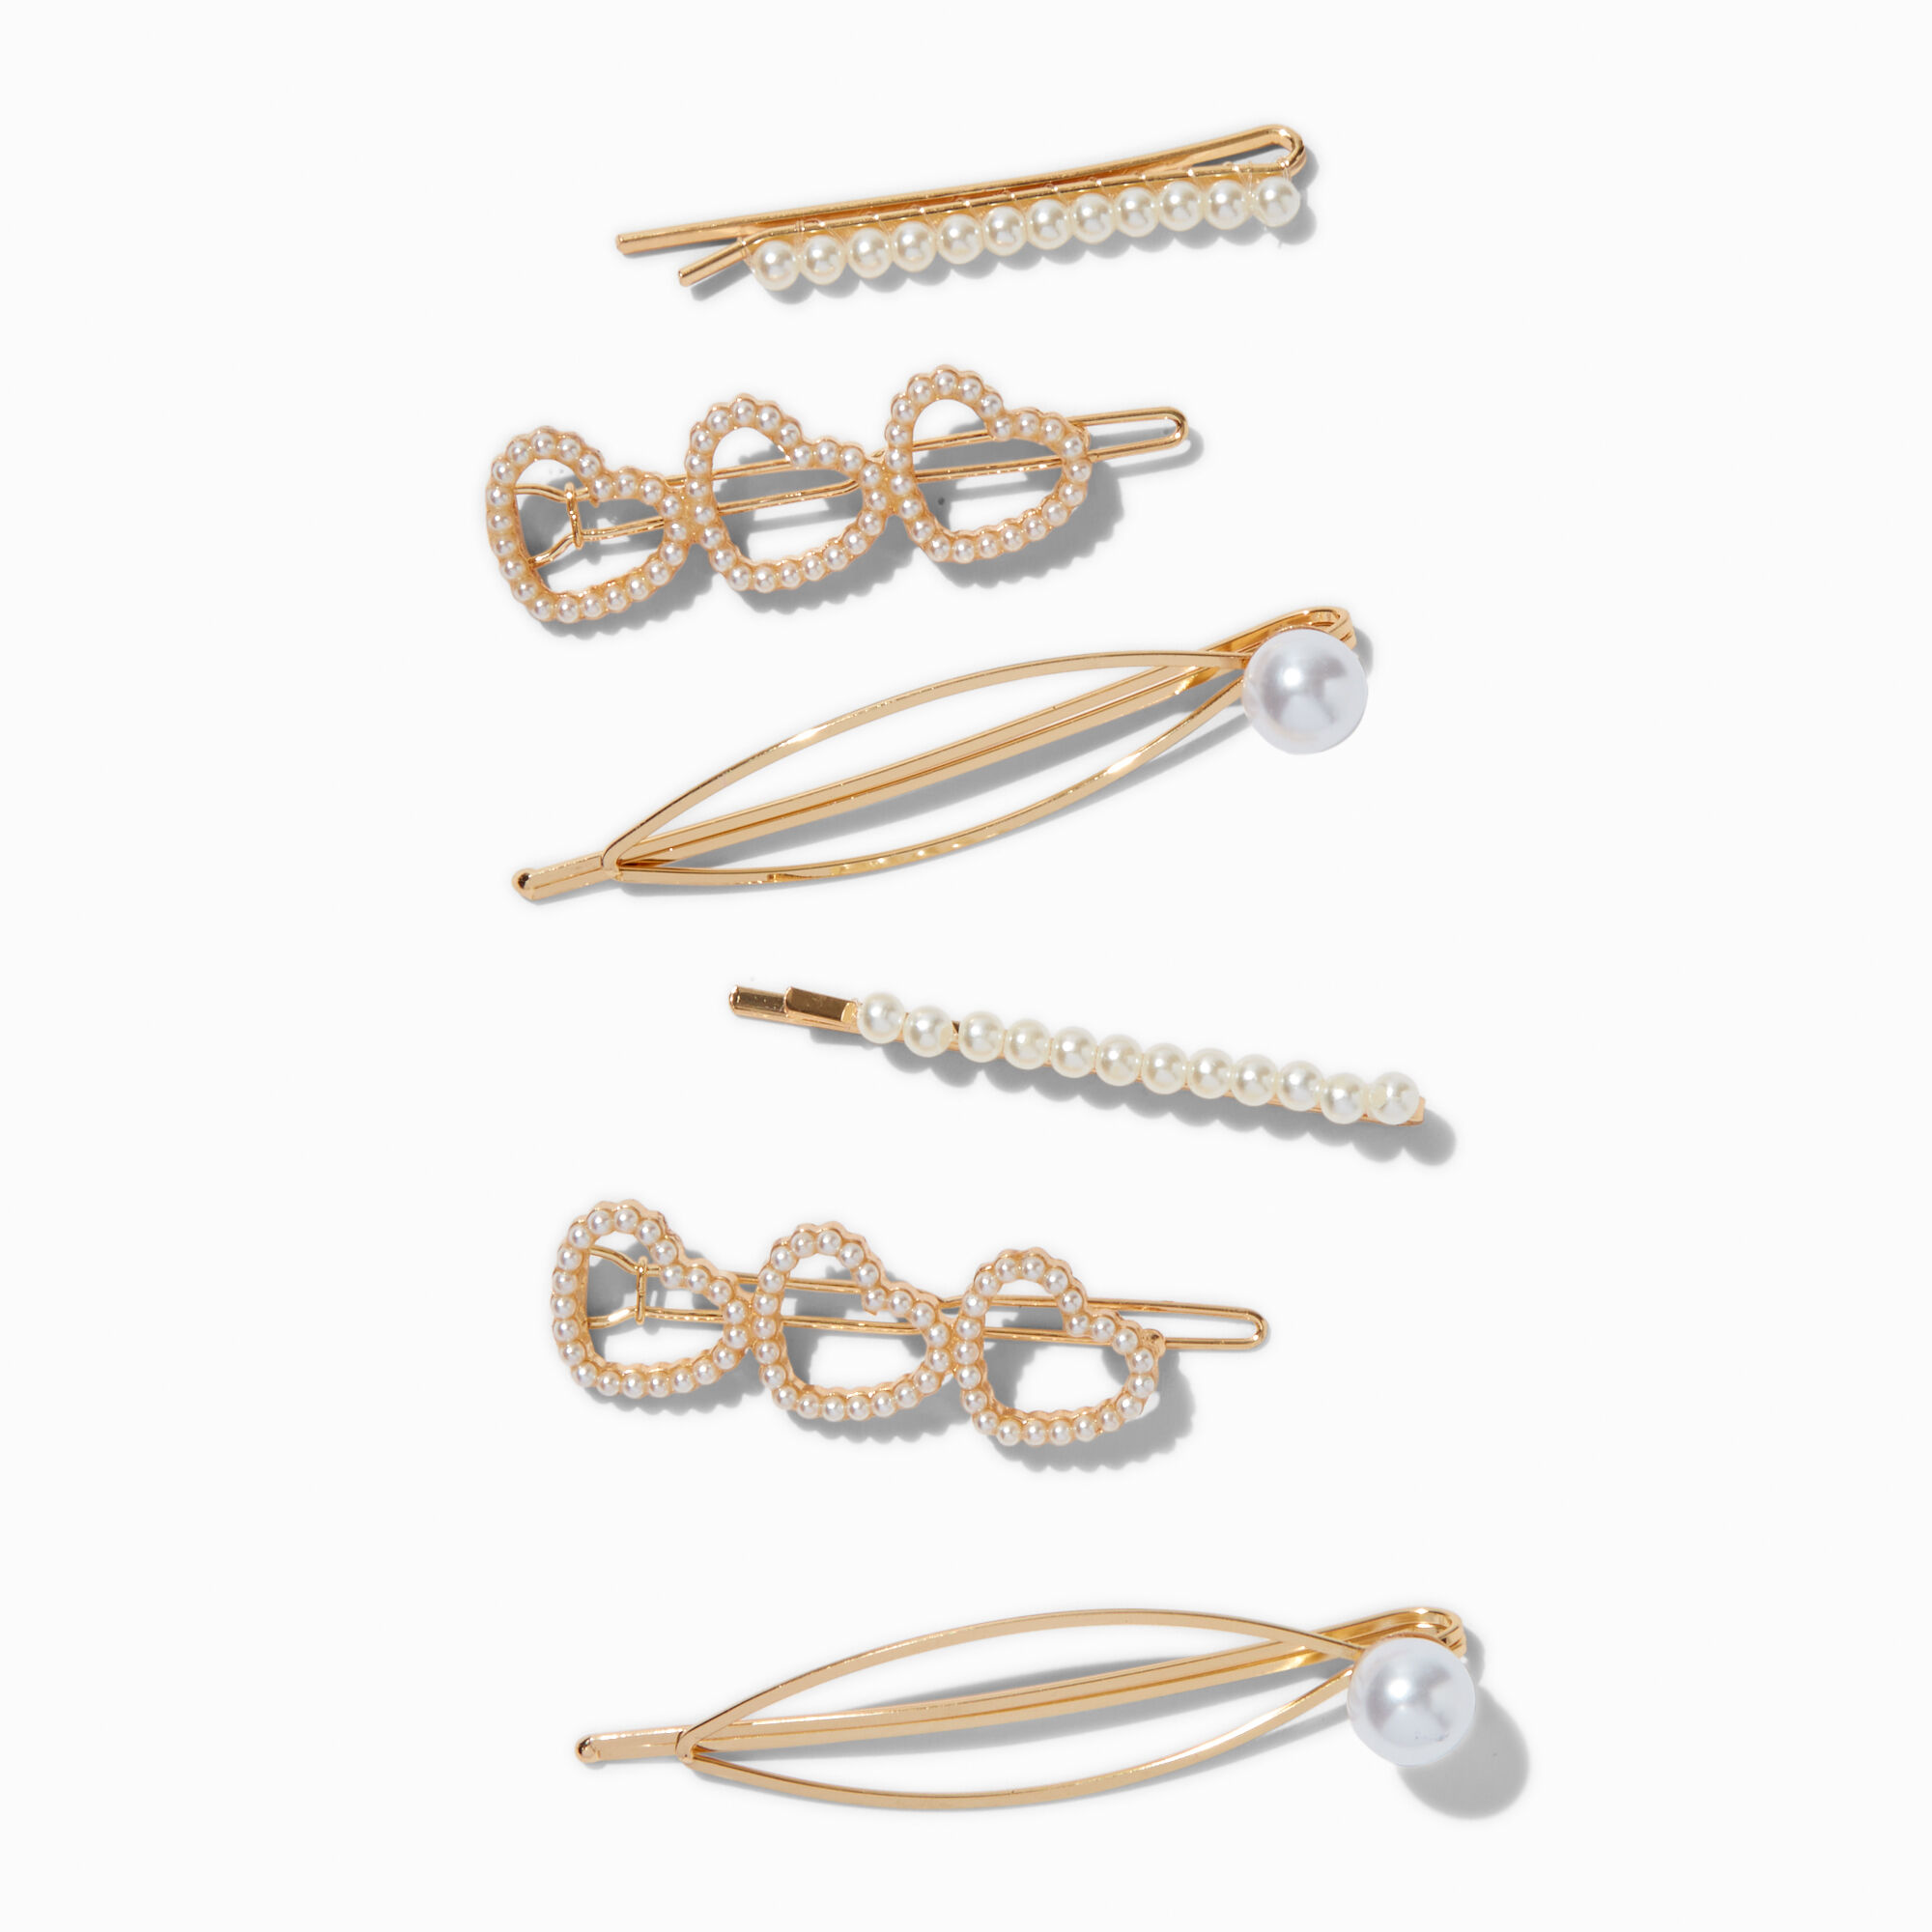 View Claires Club Tone Heart Pearl Hair Pins 6 Pack Gold information